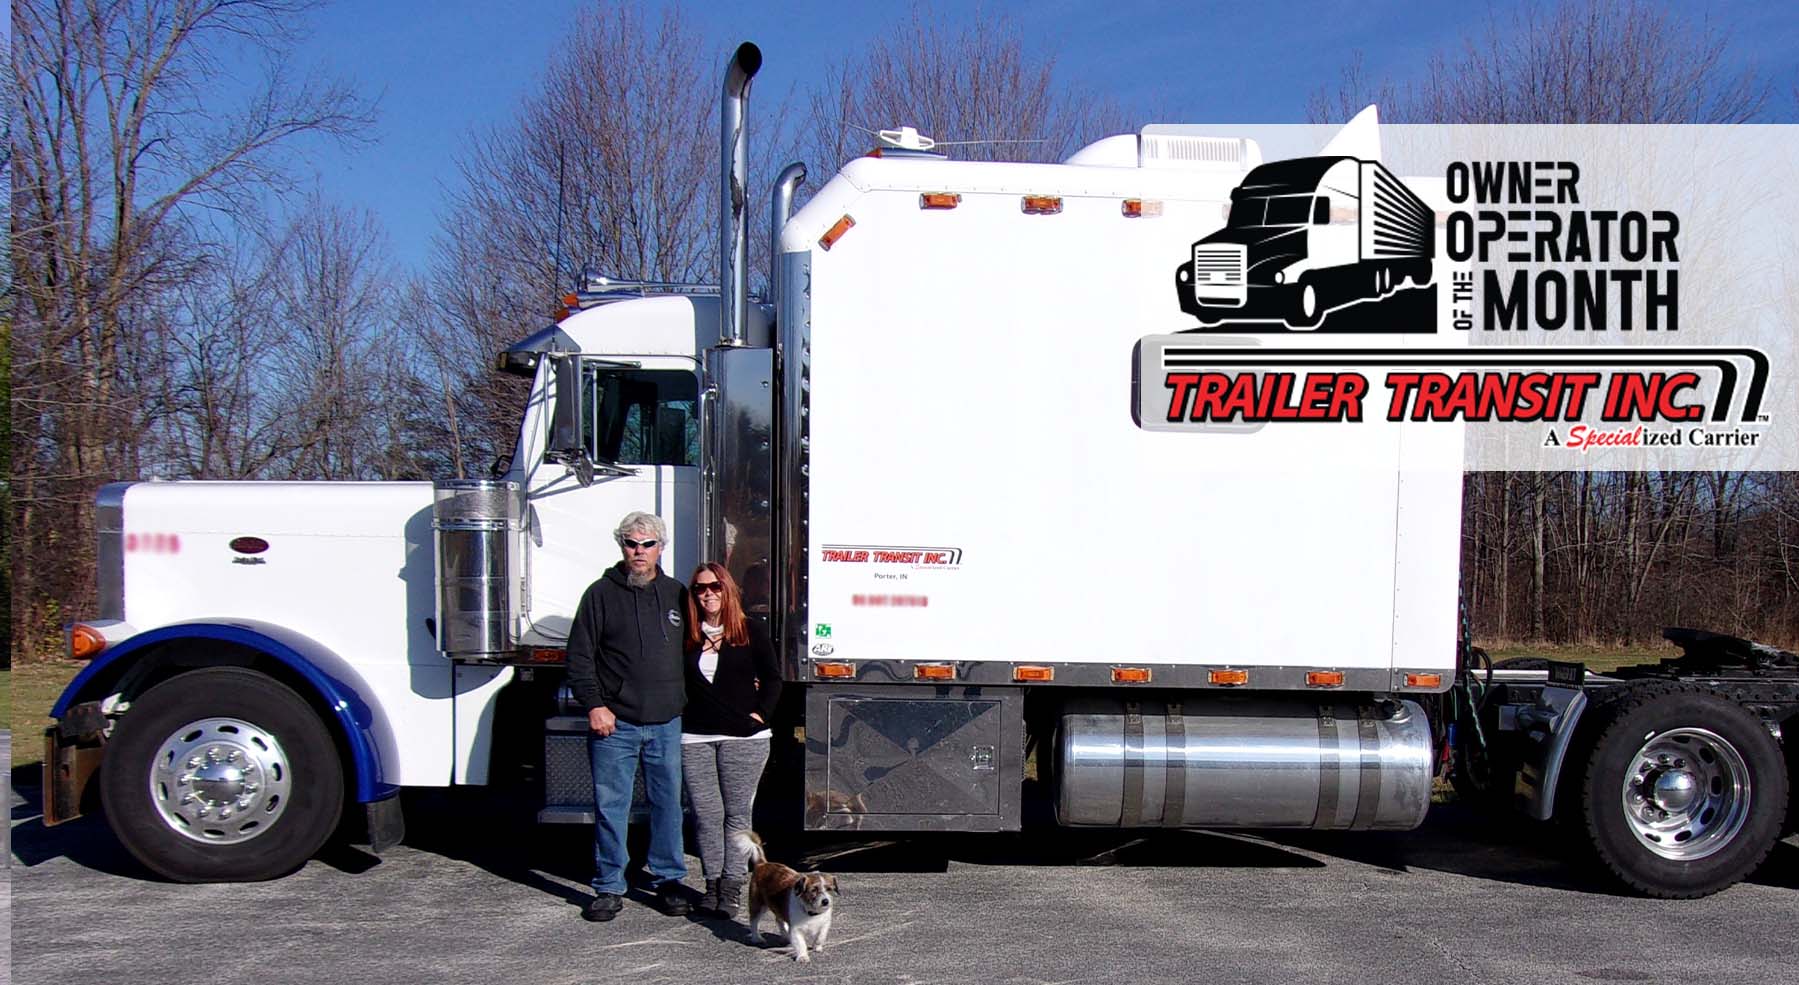 Trailer Transit Inc. | An owner operator and a woman standing in front of a semi truck.